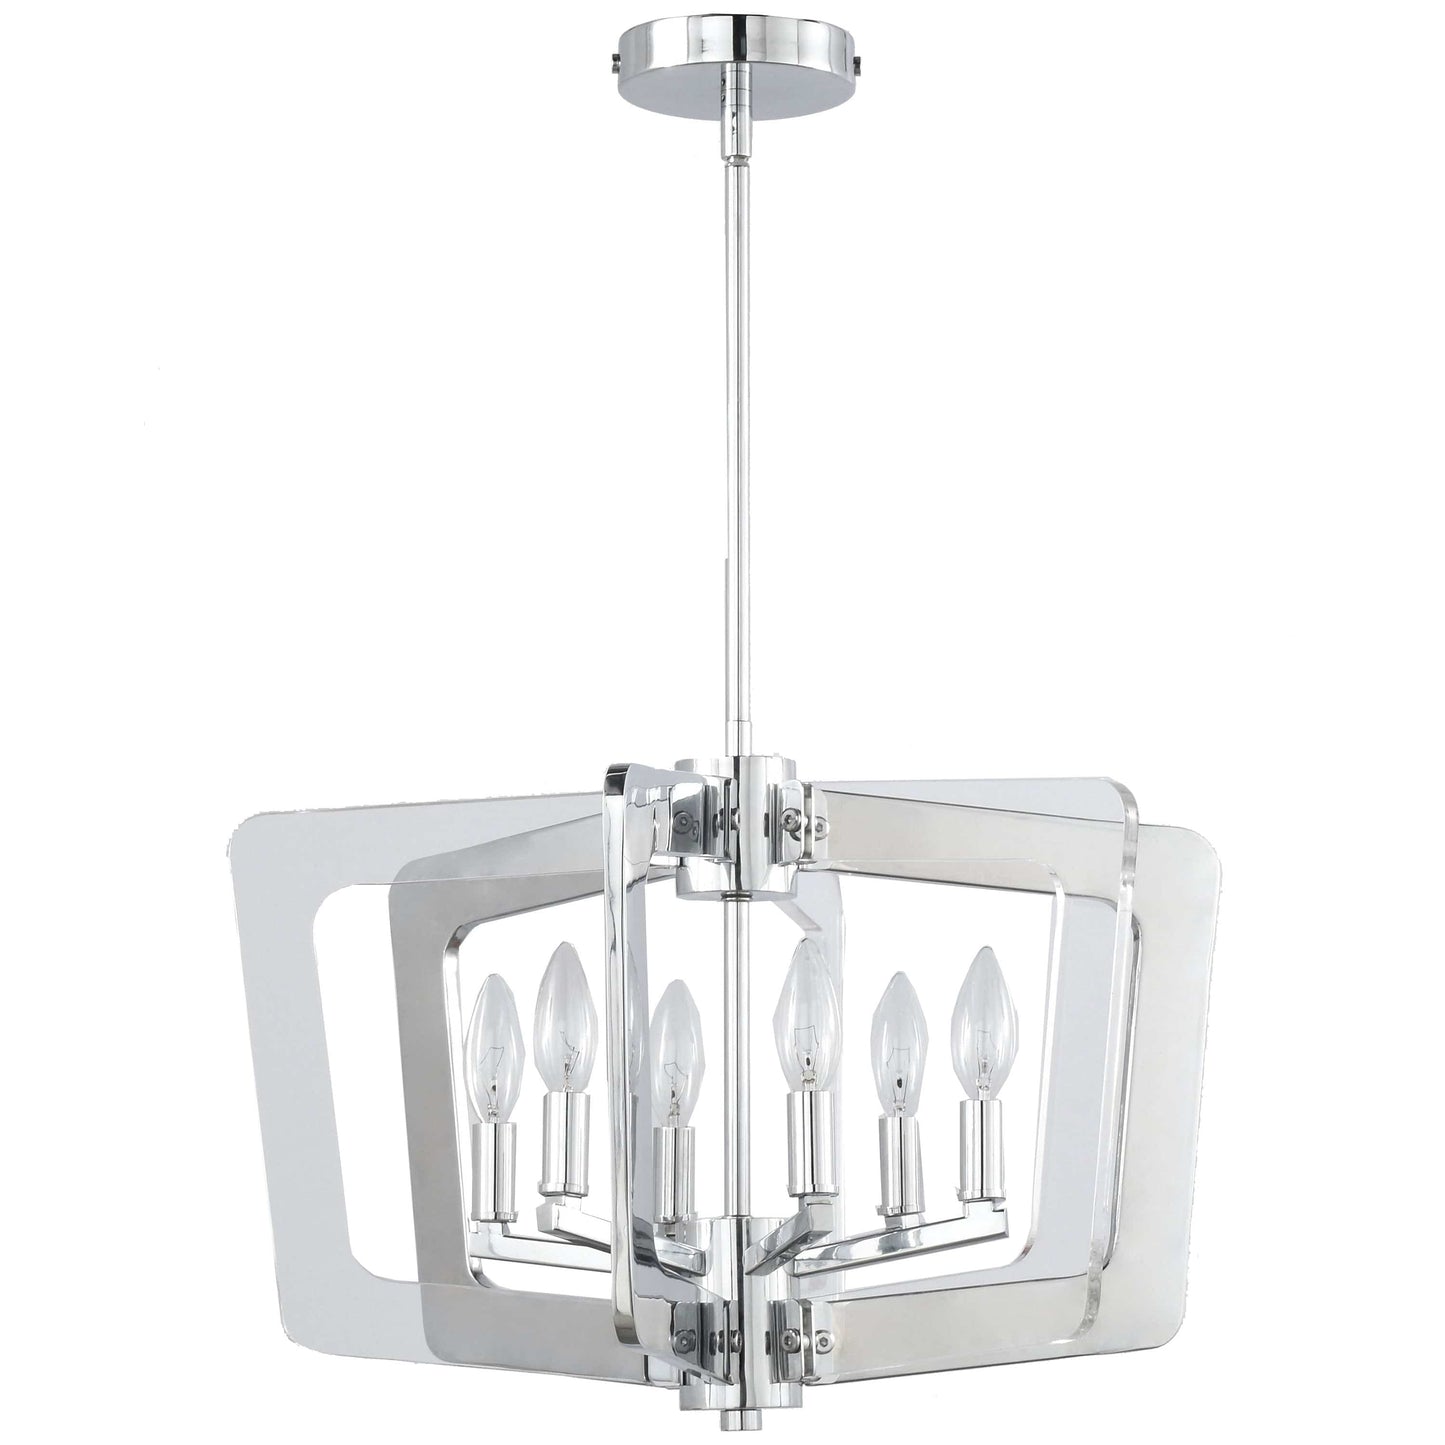 Dainolite 6 Light Chandelier in Polished Chrome Finish with Chrome and Clear Acrylic Arms